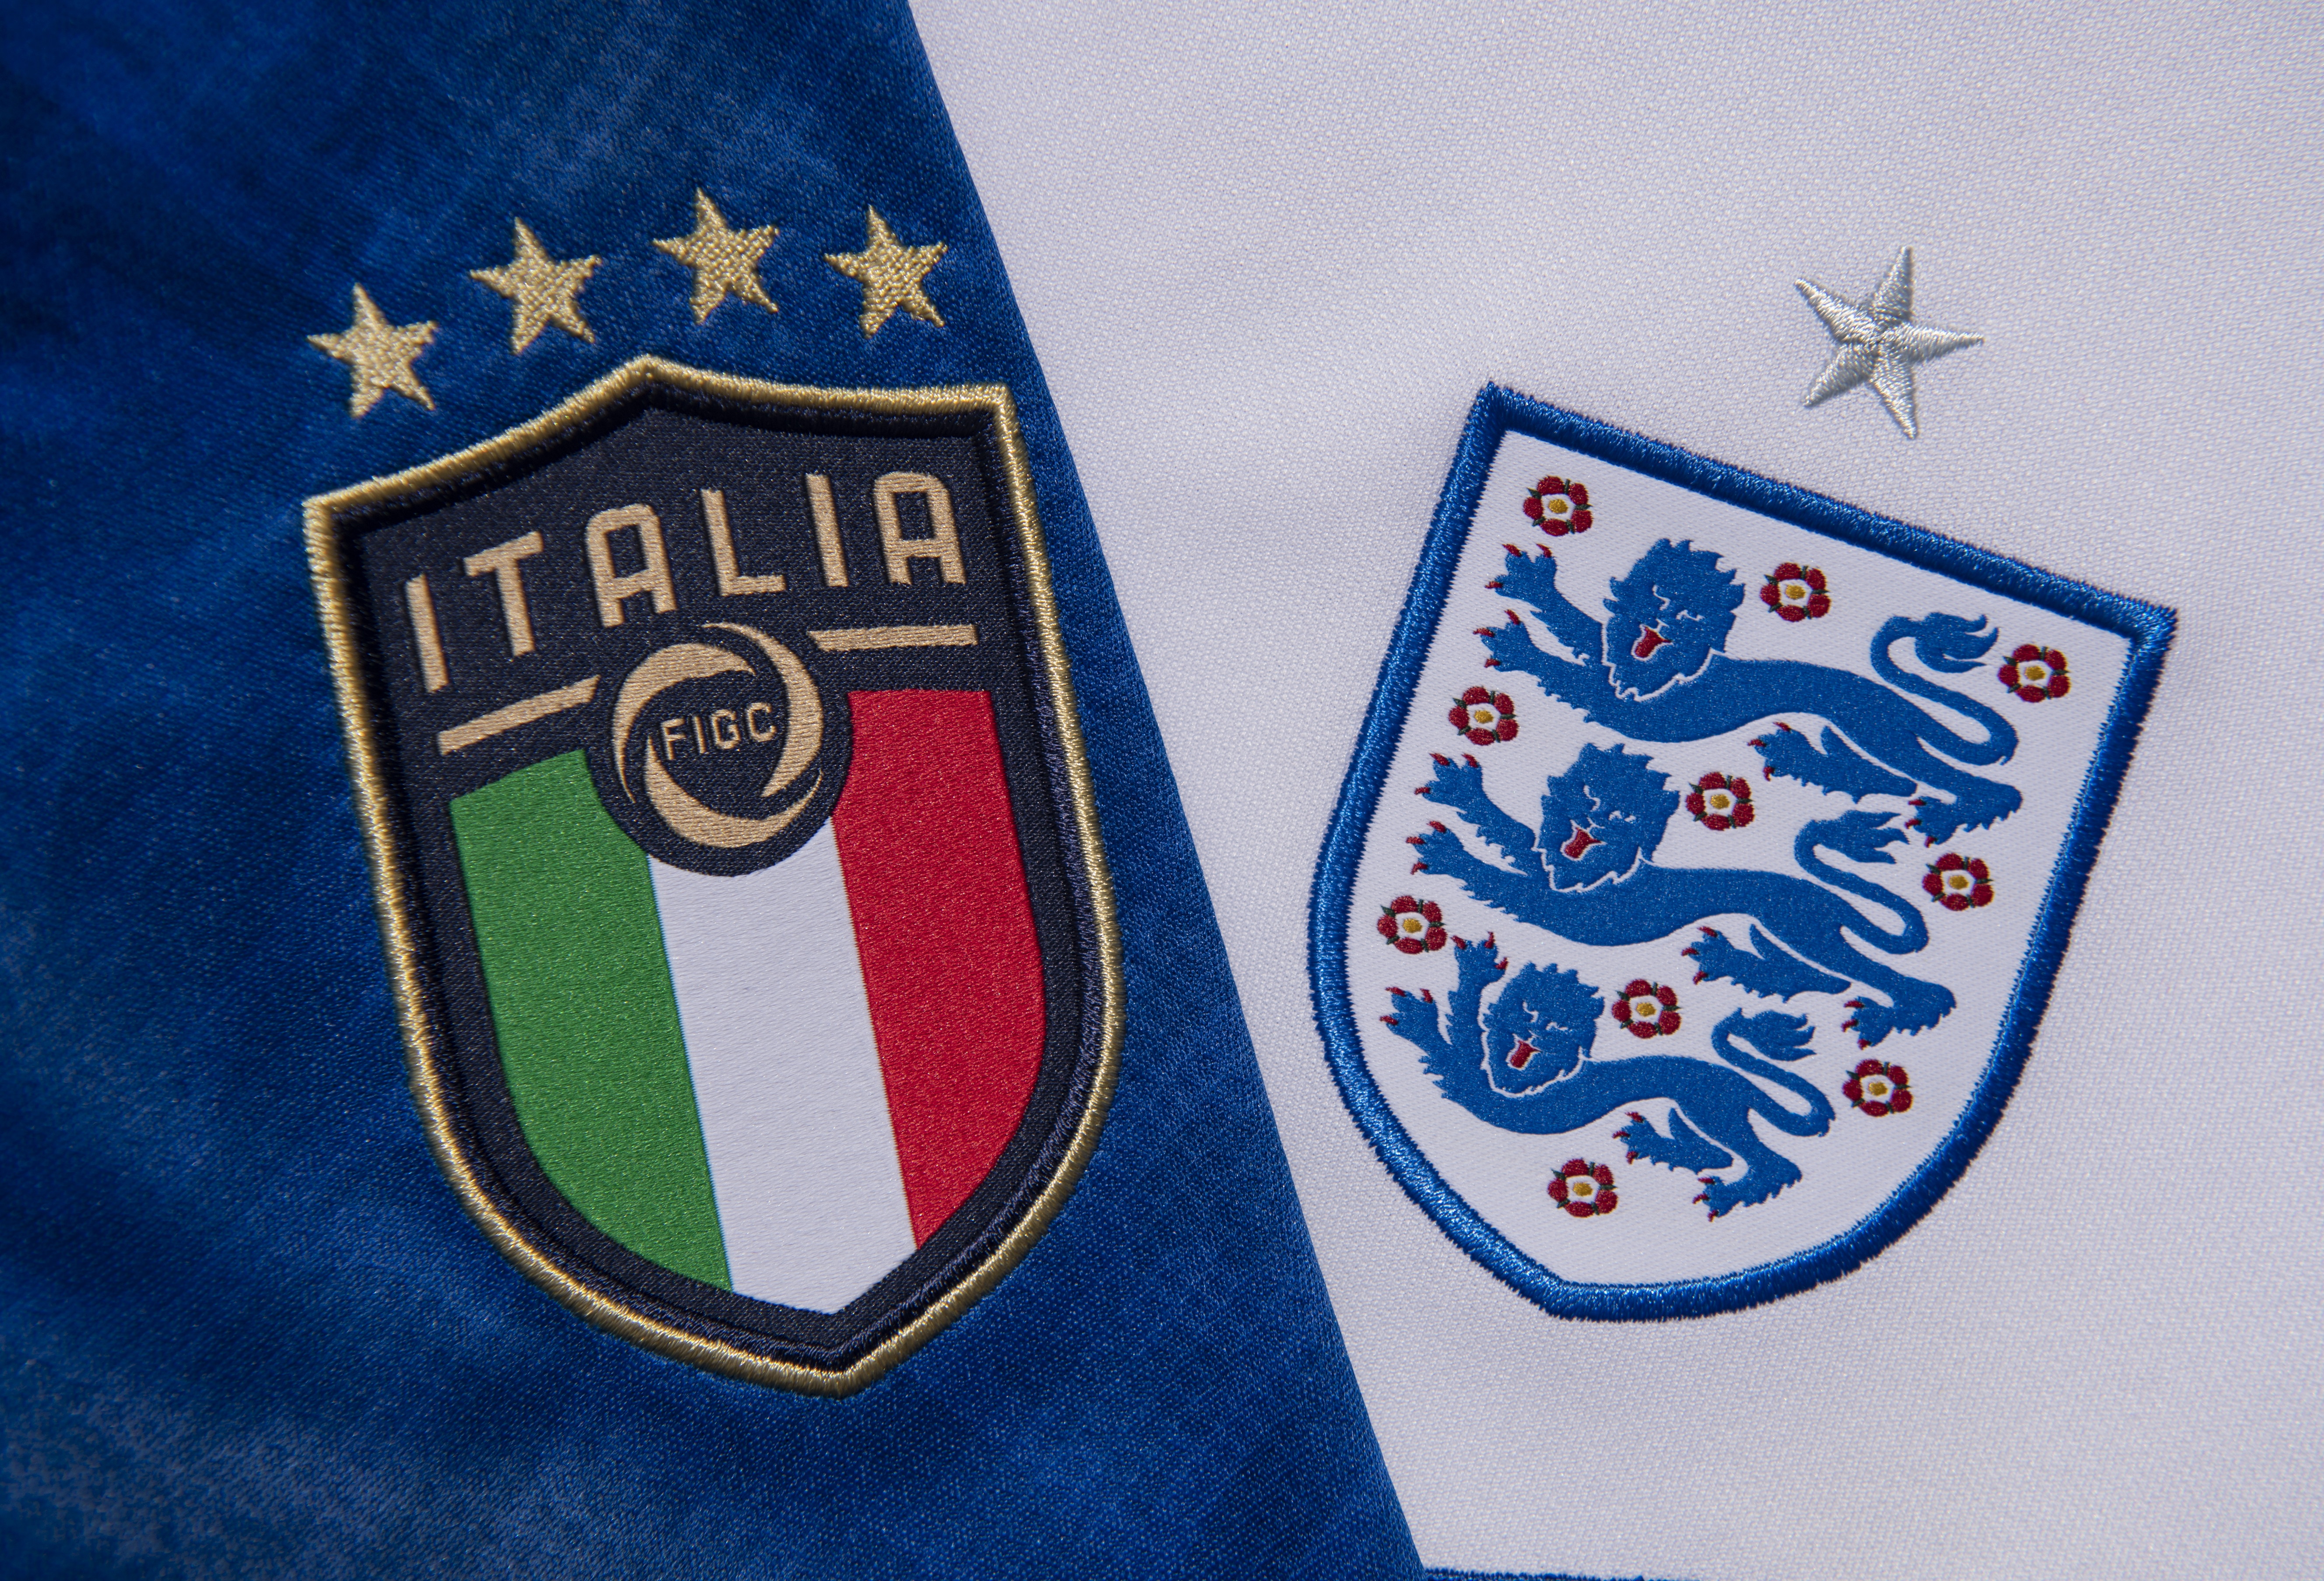 The Italy and England Badges